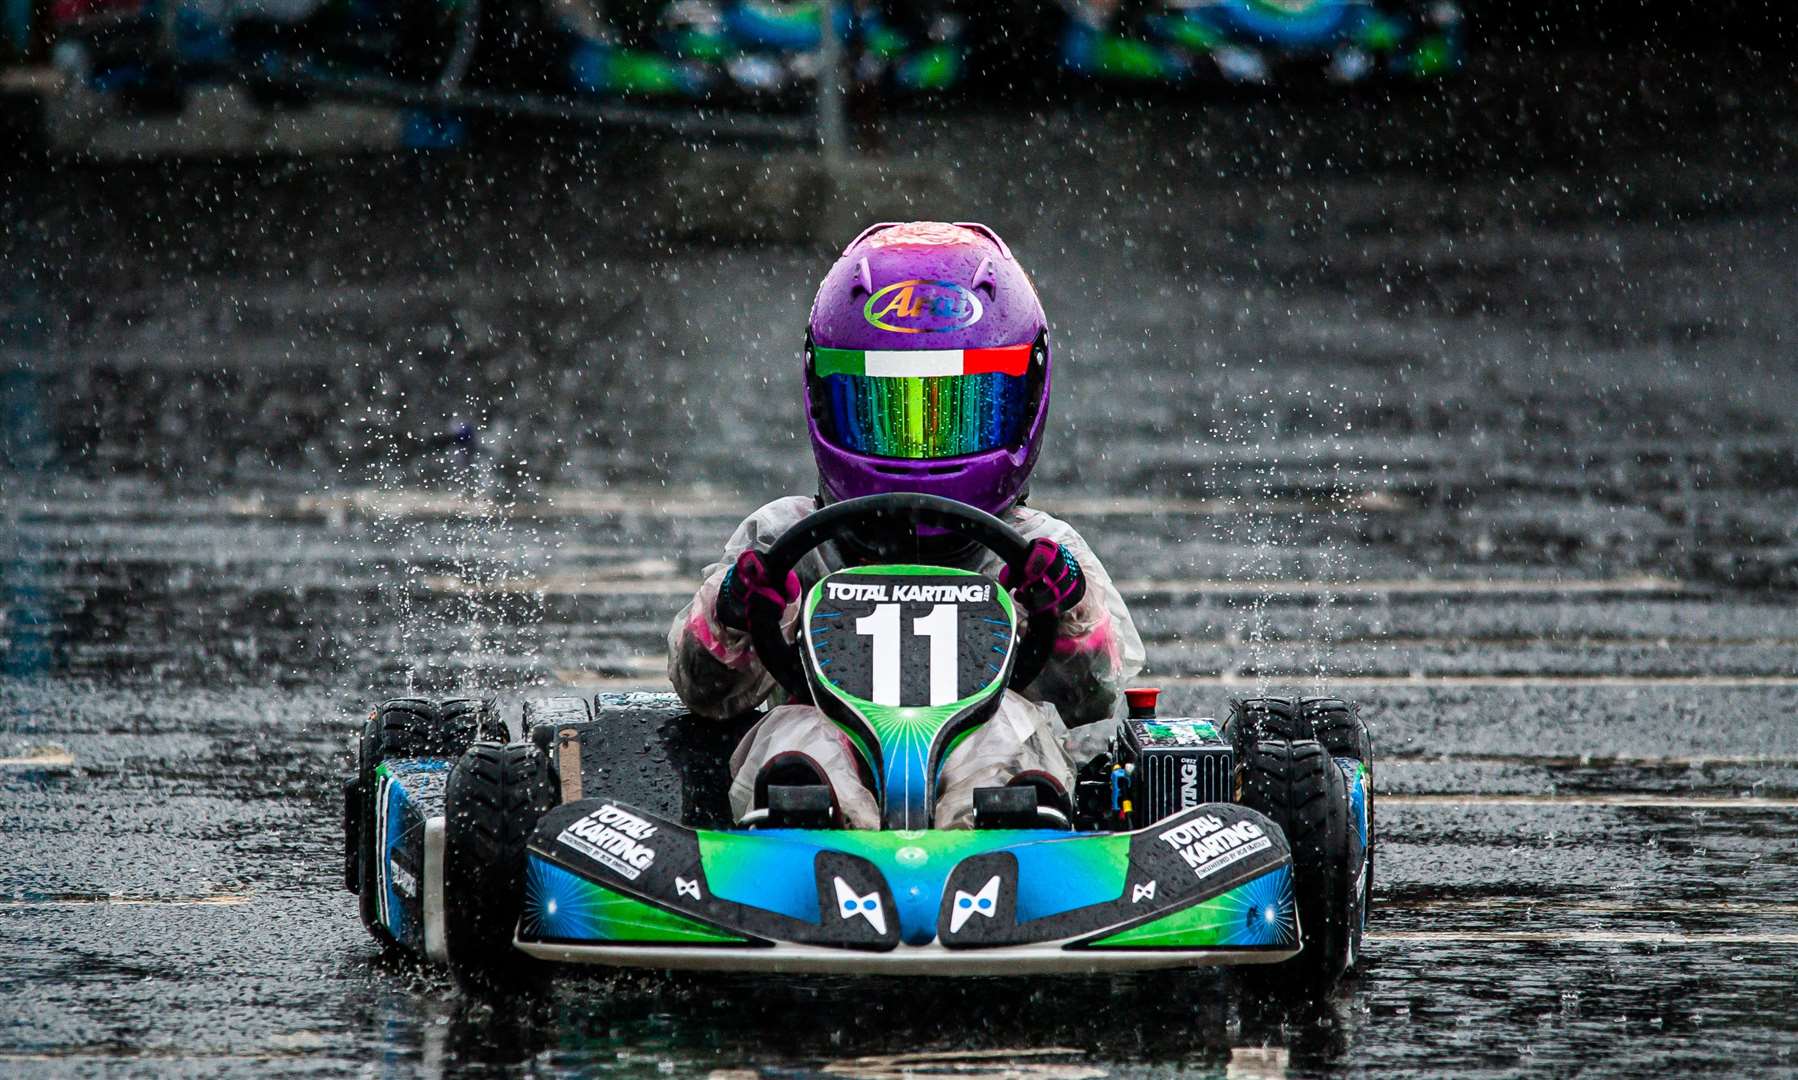 Maria Ruberto excels in the wet in her electric kart Picture: Mark Campbell